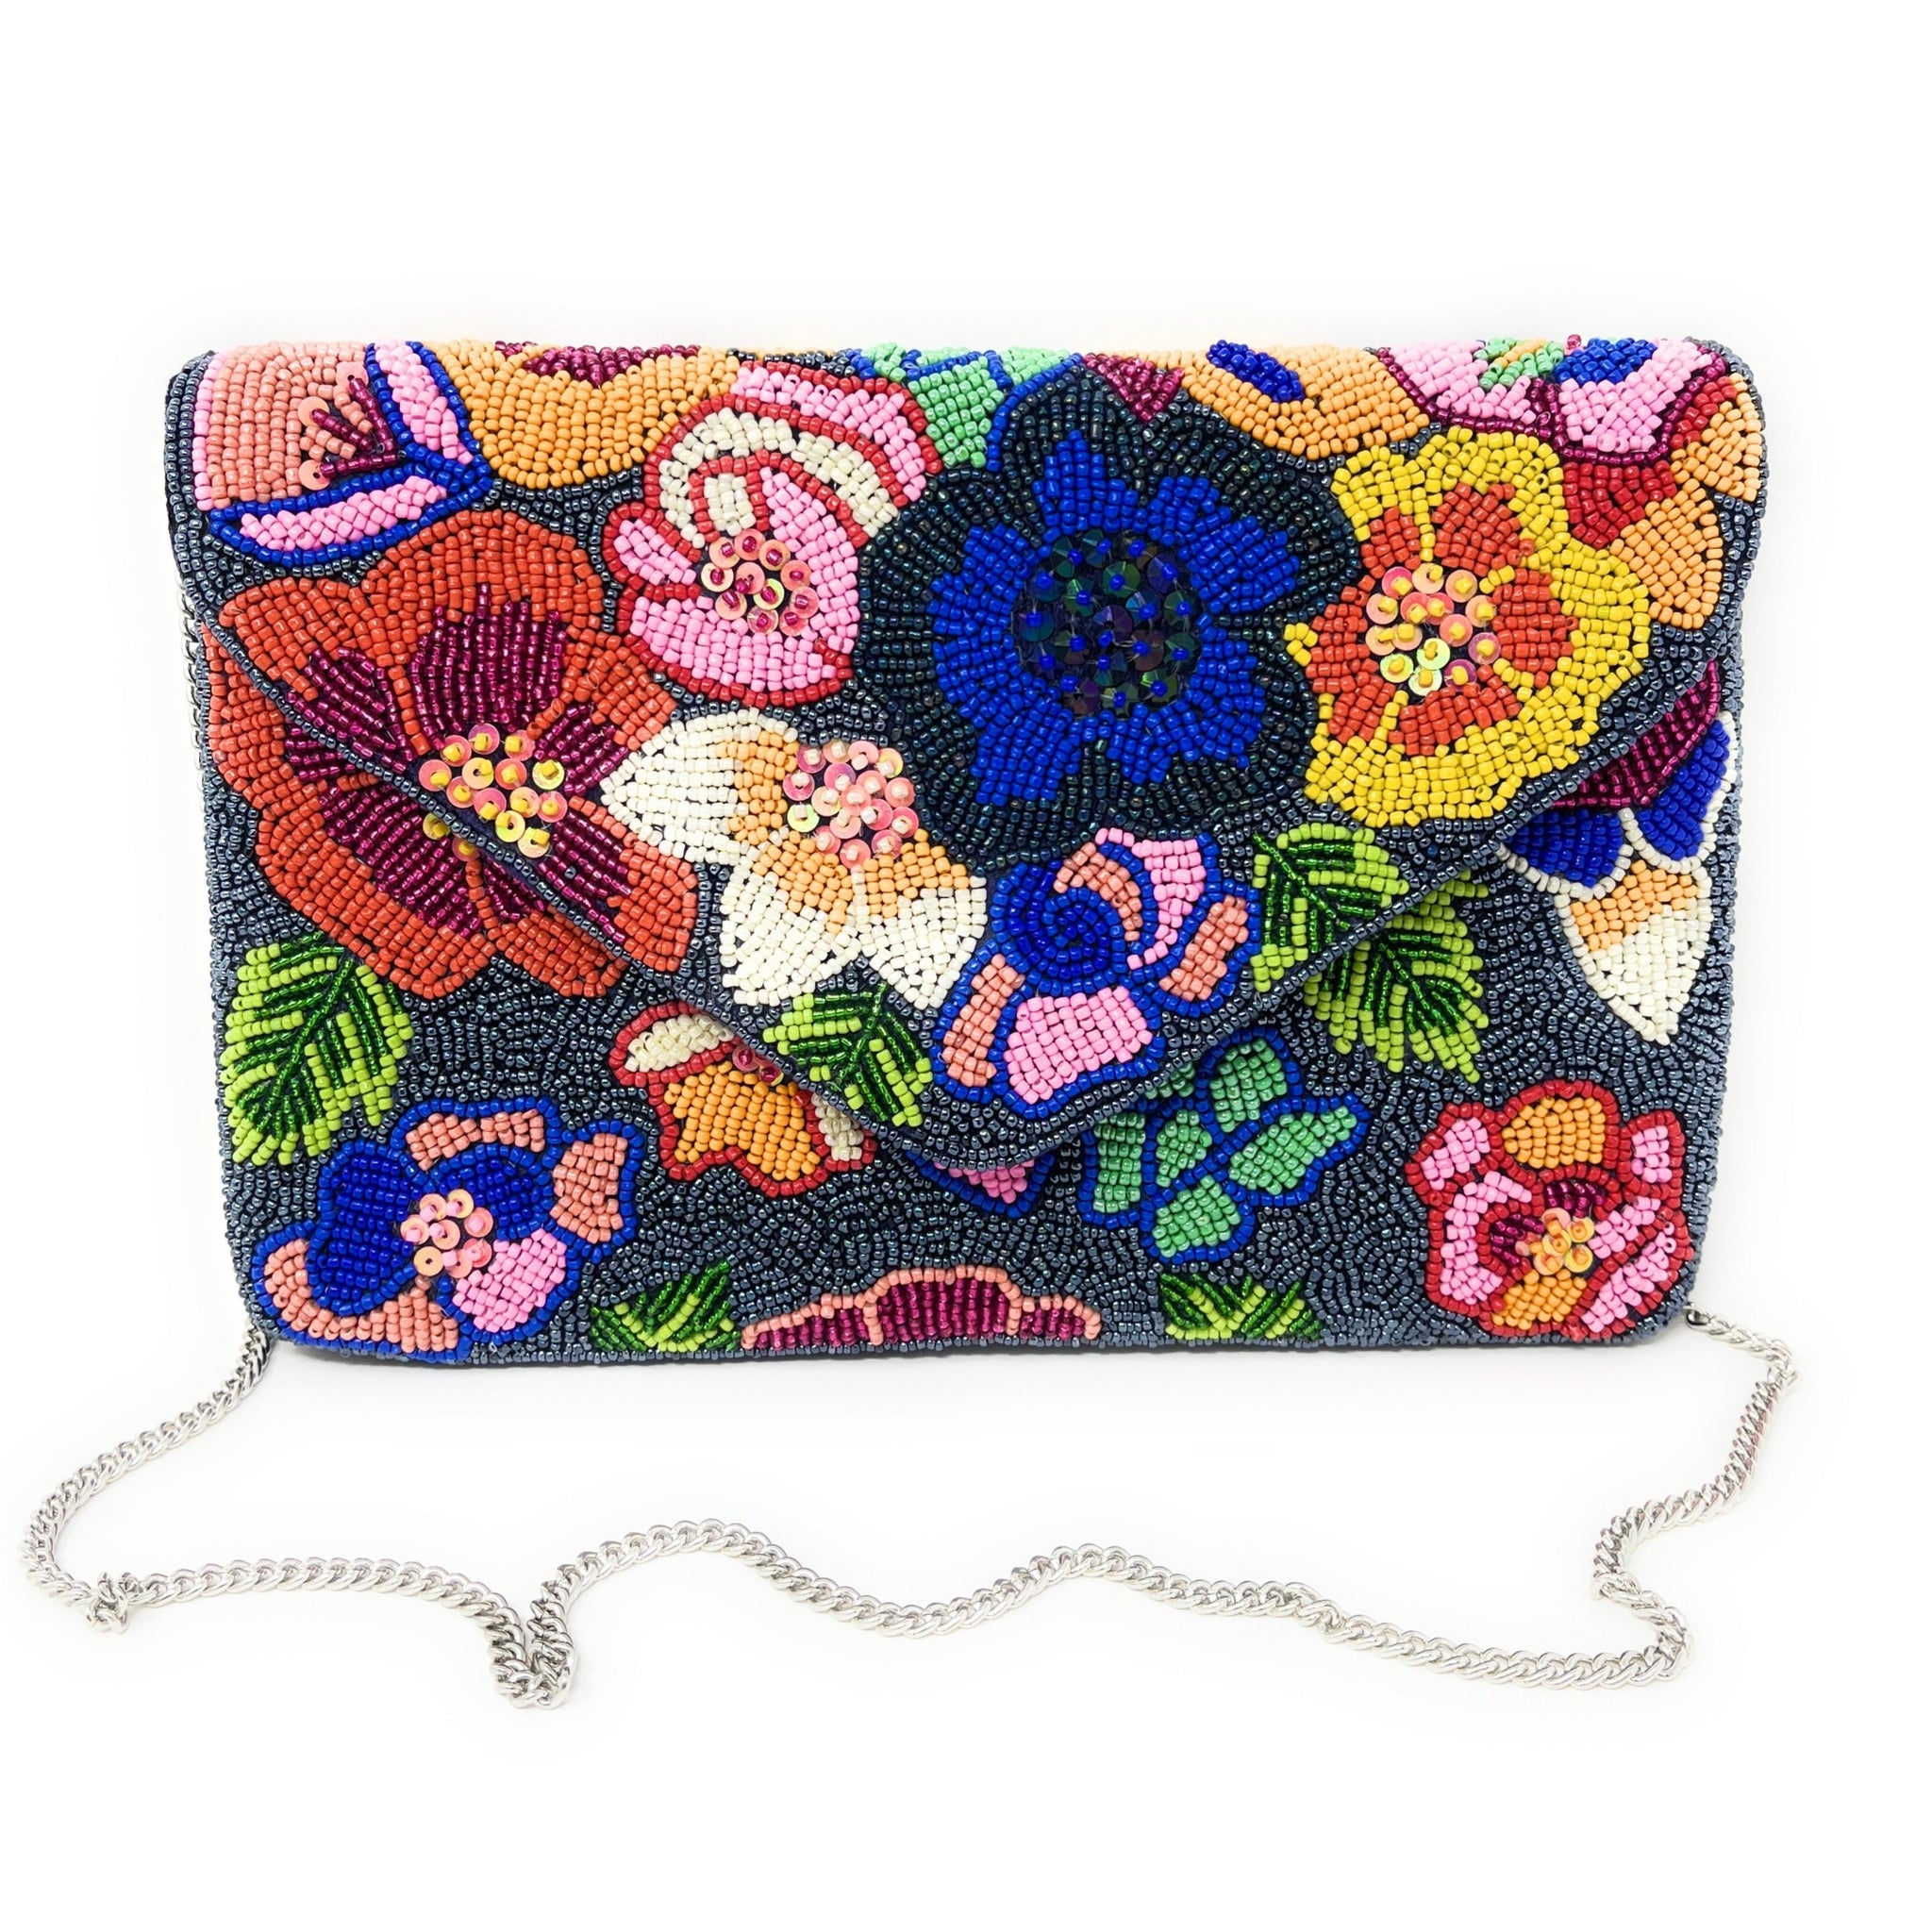 Hand Beaded Floral Clutch, Seed Bead Clutch Bag, Floral Beaded Clutch